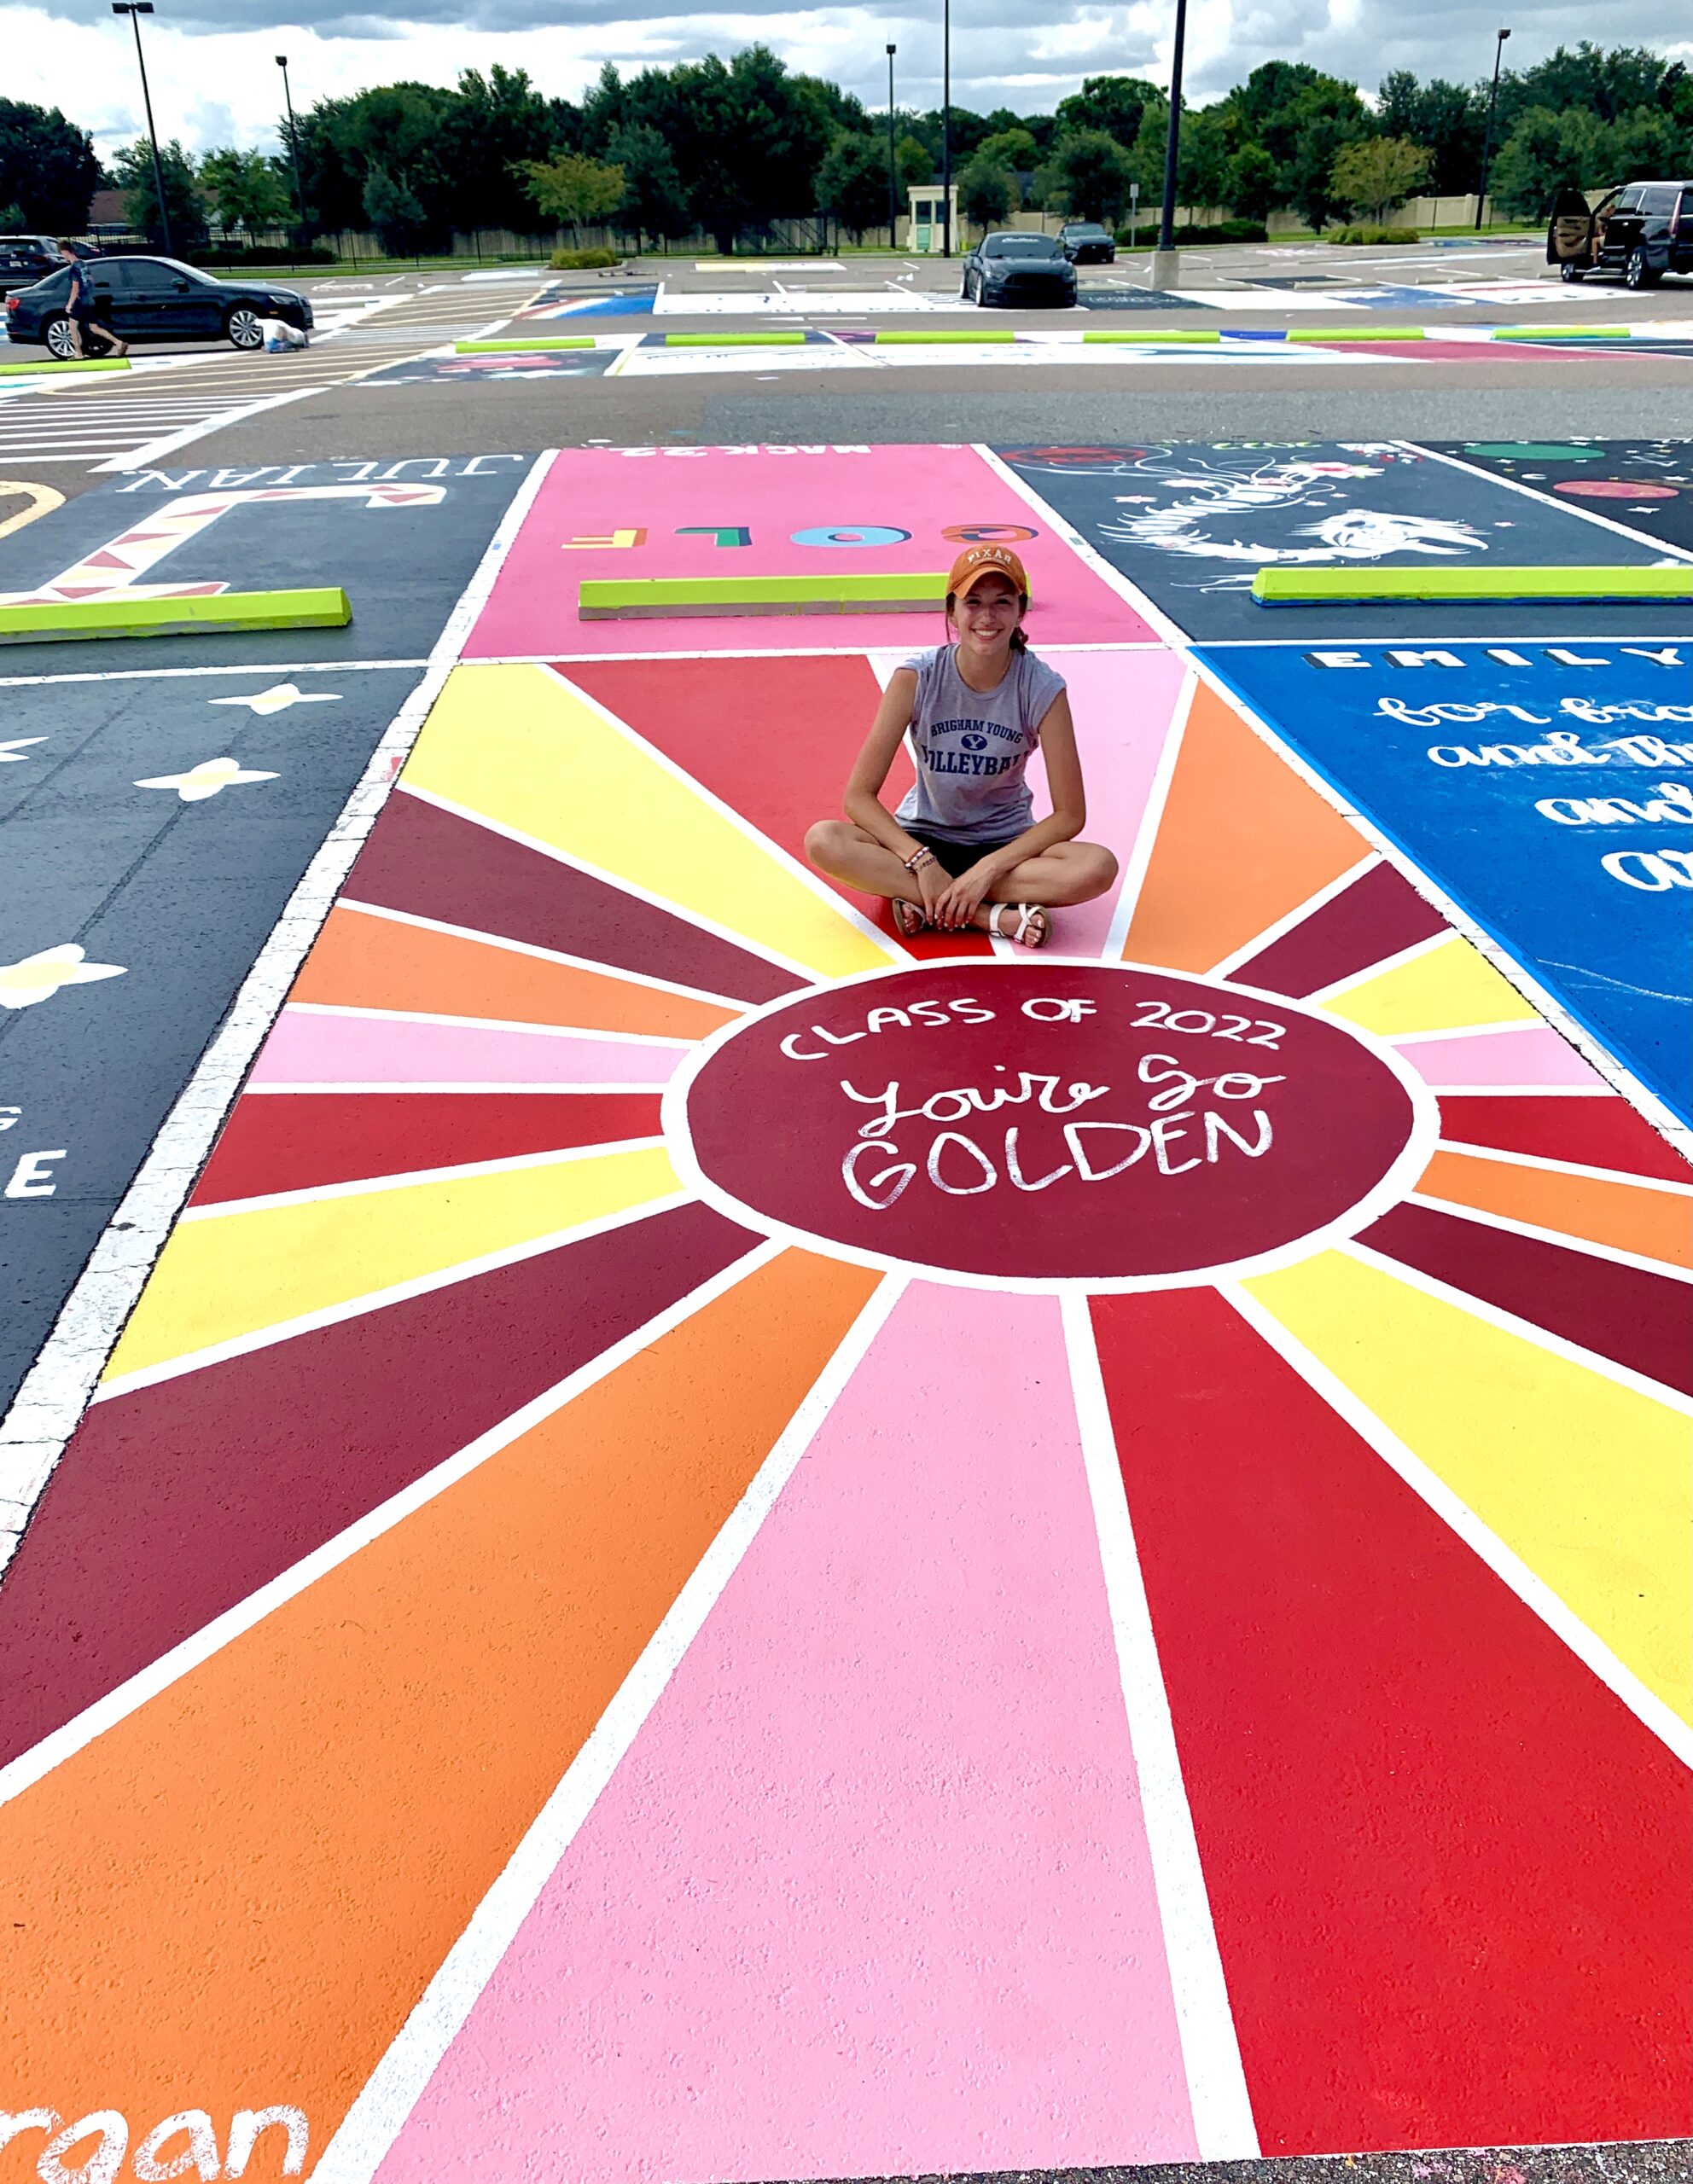 Fun Senior Parking Spot Ideas And Tips on How to Paint One - Lola Lambchops